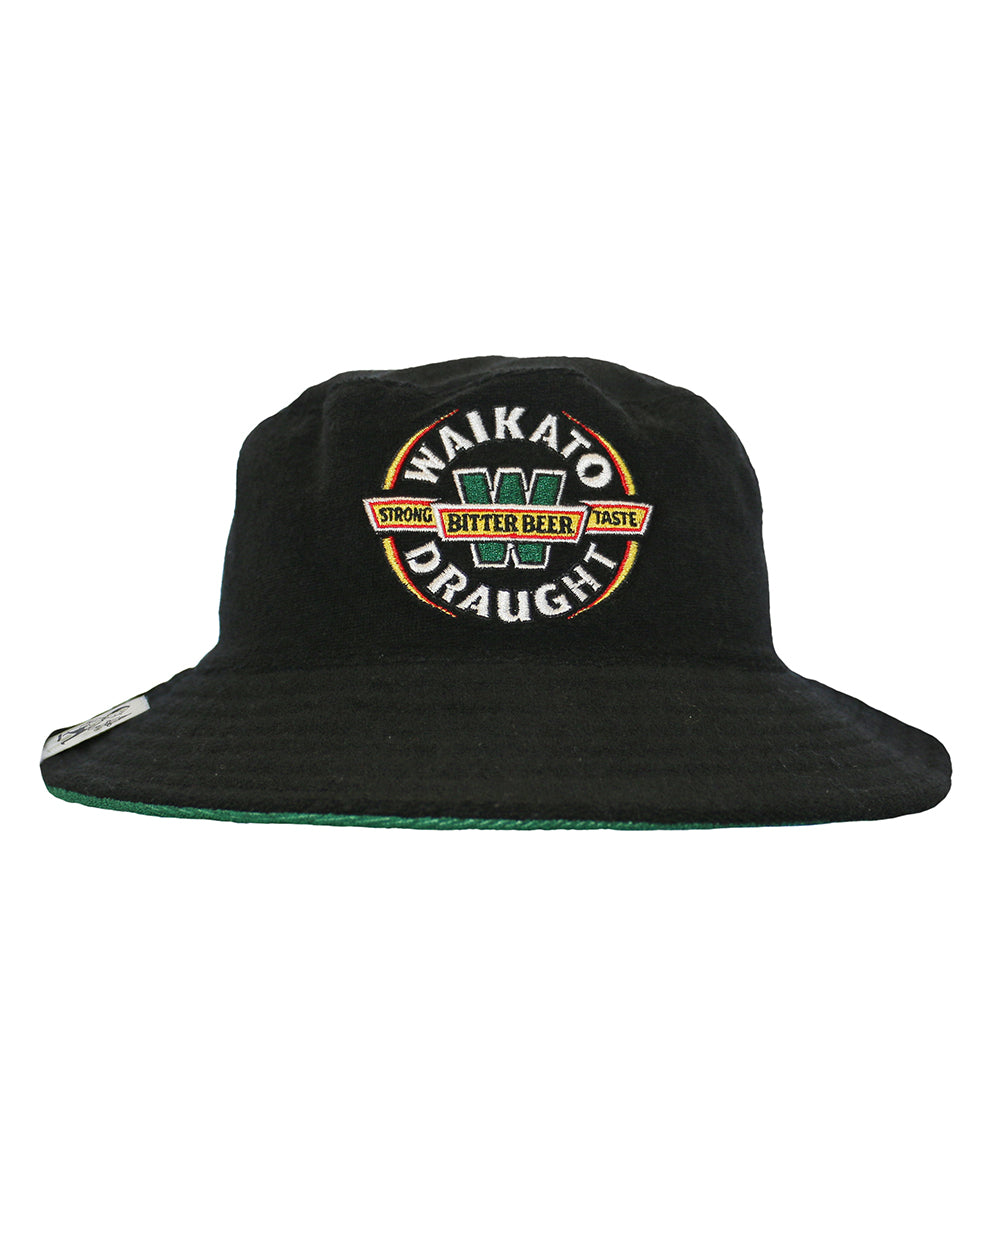 Waikato Draught Bucket Hat -  Beer Gear Apparel & Merchandise - Speights - Lion Red - VB - Tokyo Dy merch